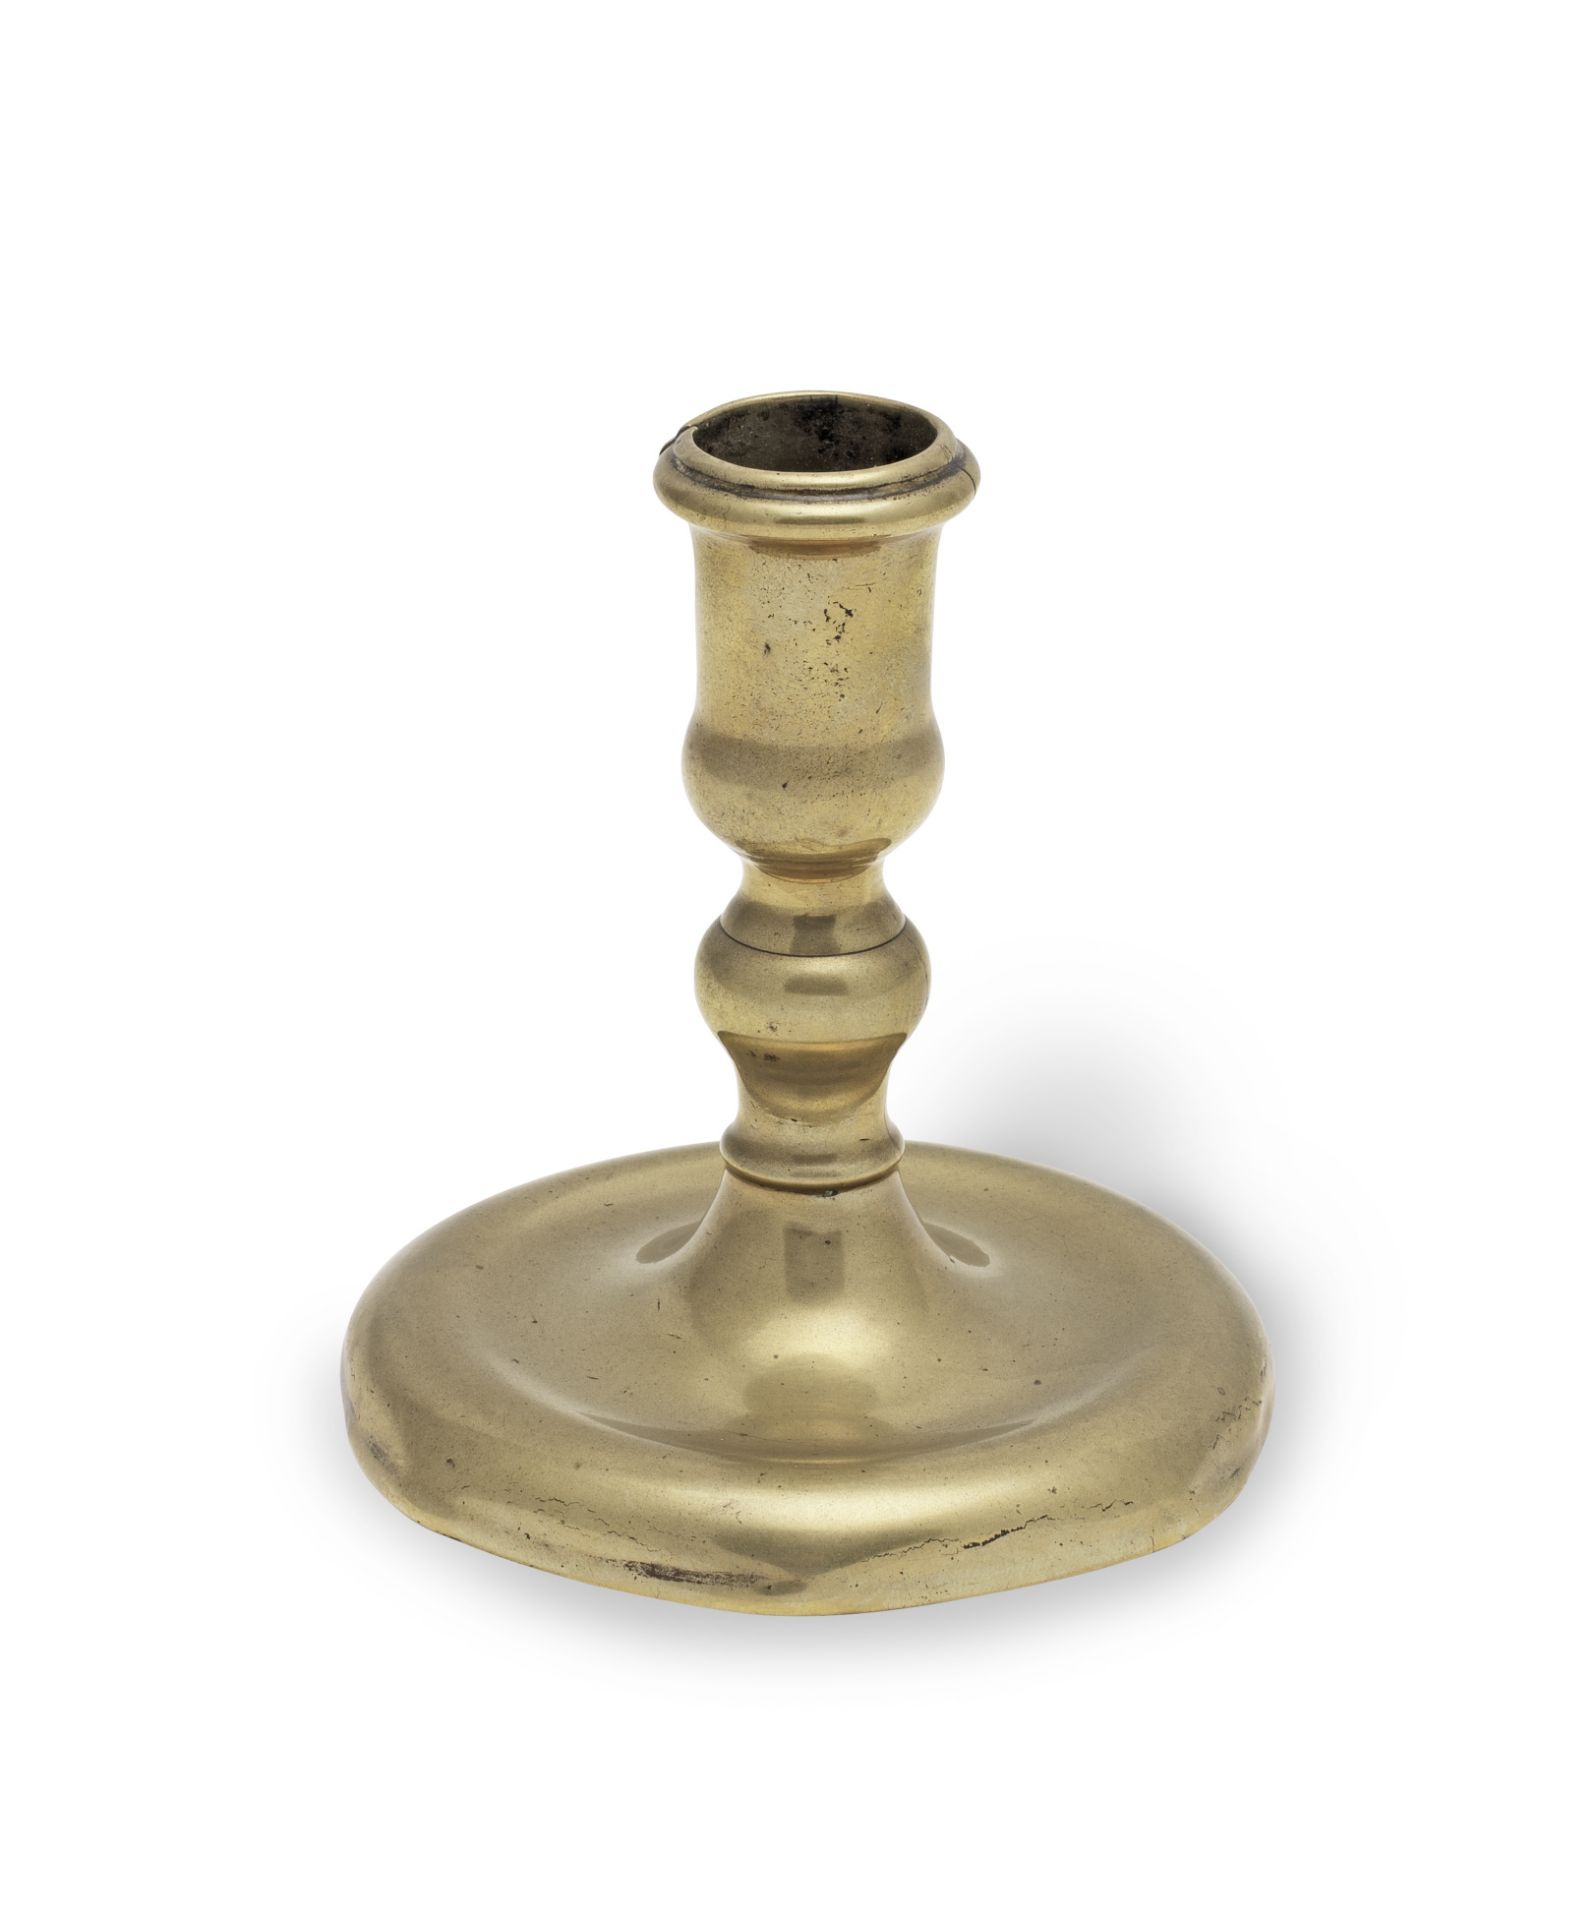 A rare early 18th century brass dwarf socket candlestick, circa 1700-20 Possibly from a toilet se...